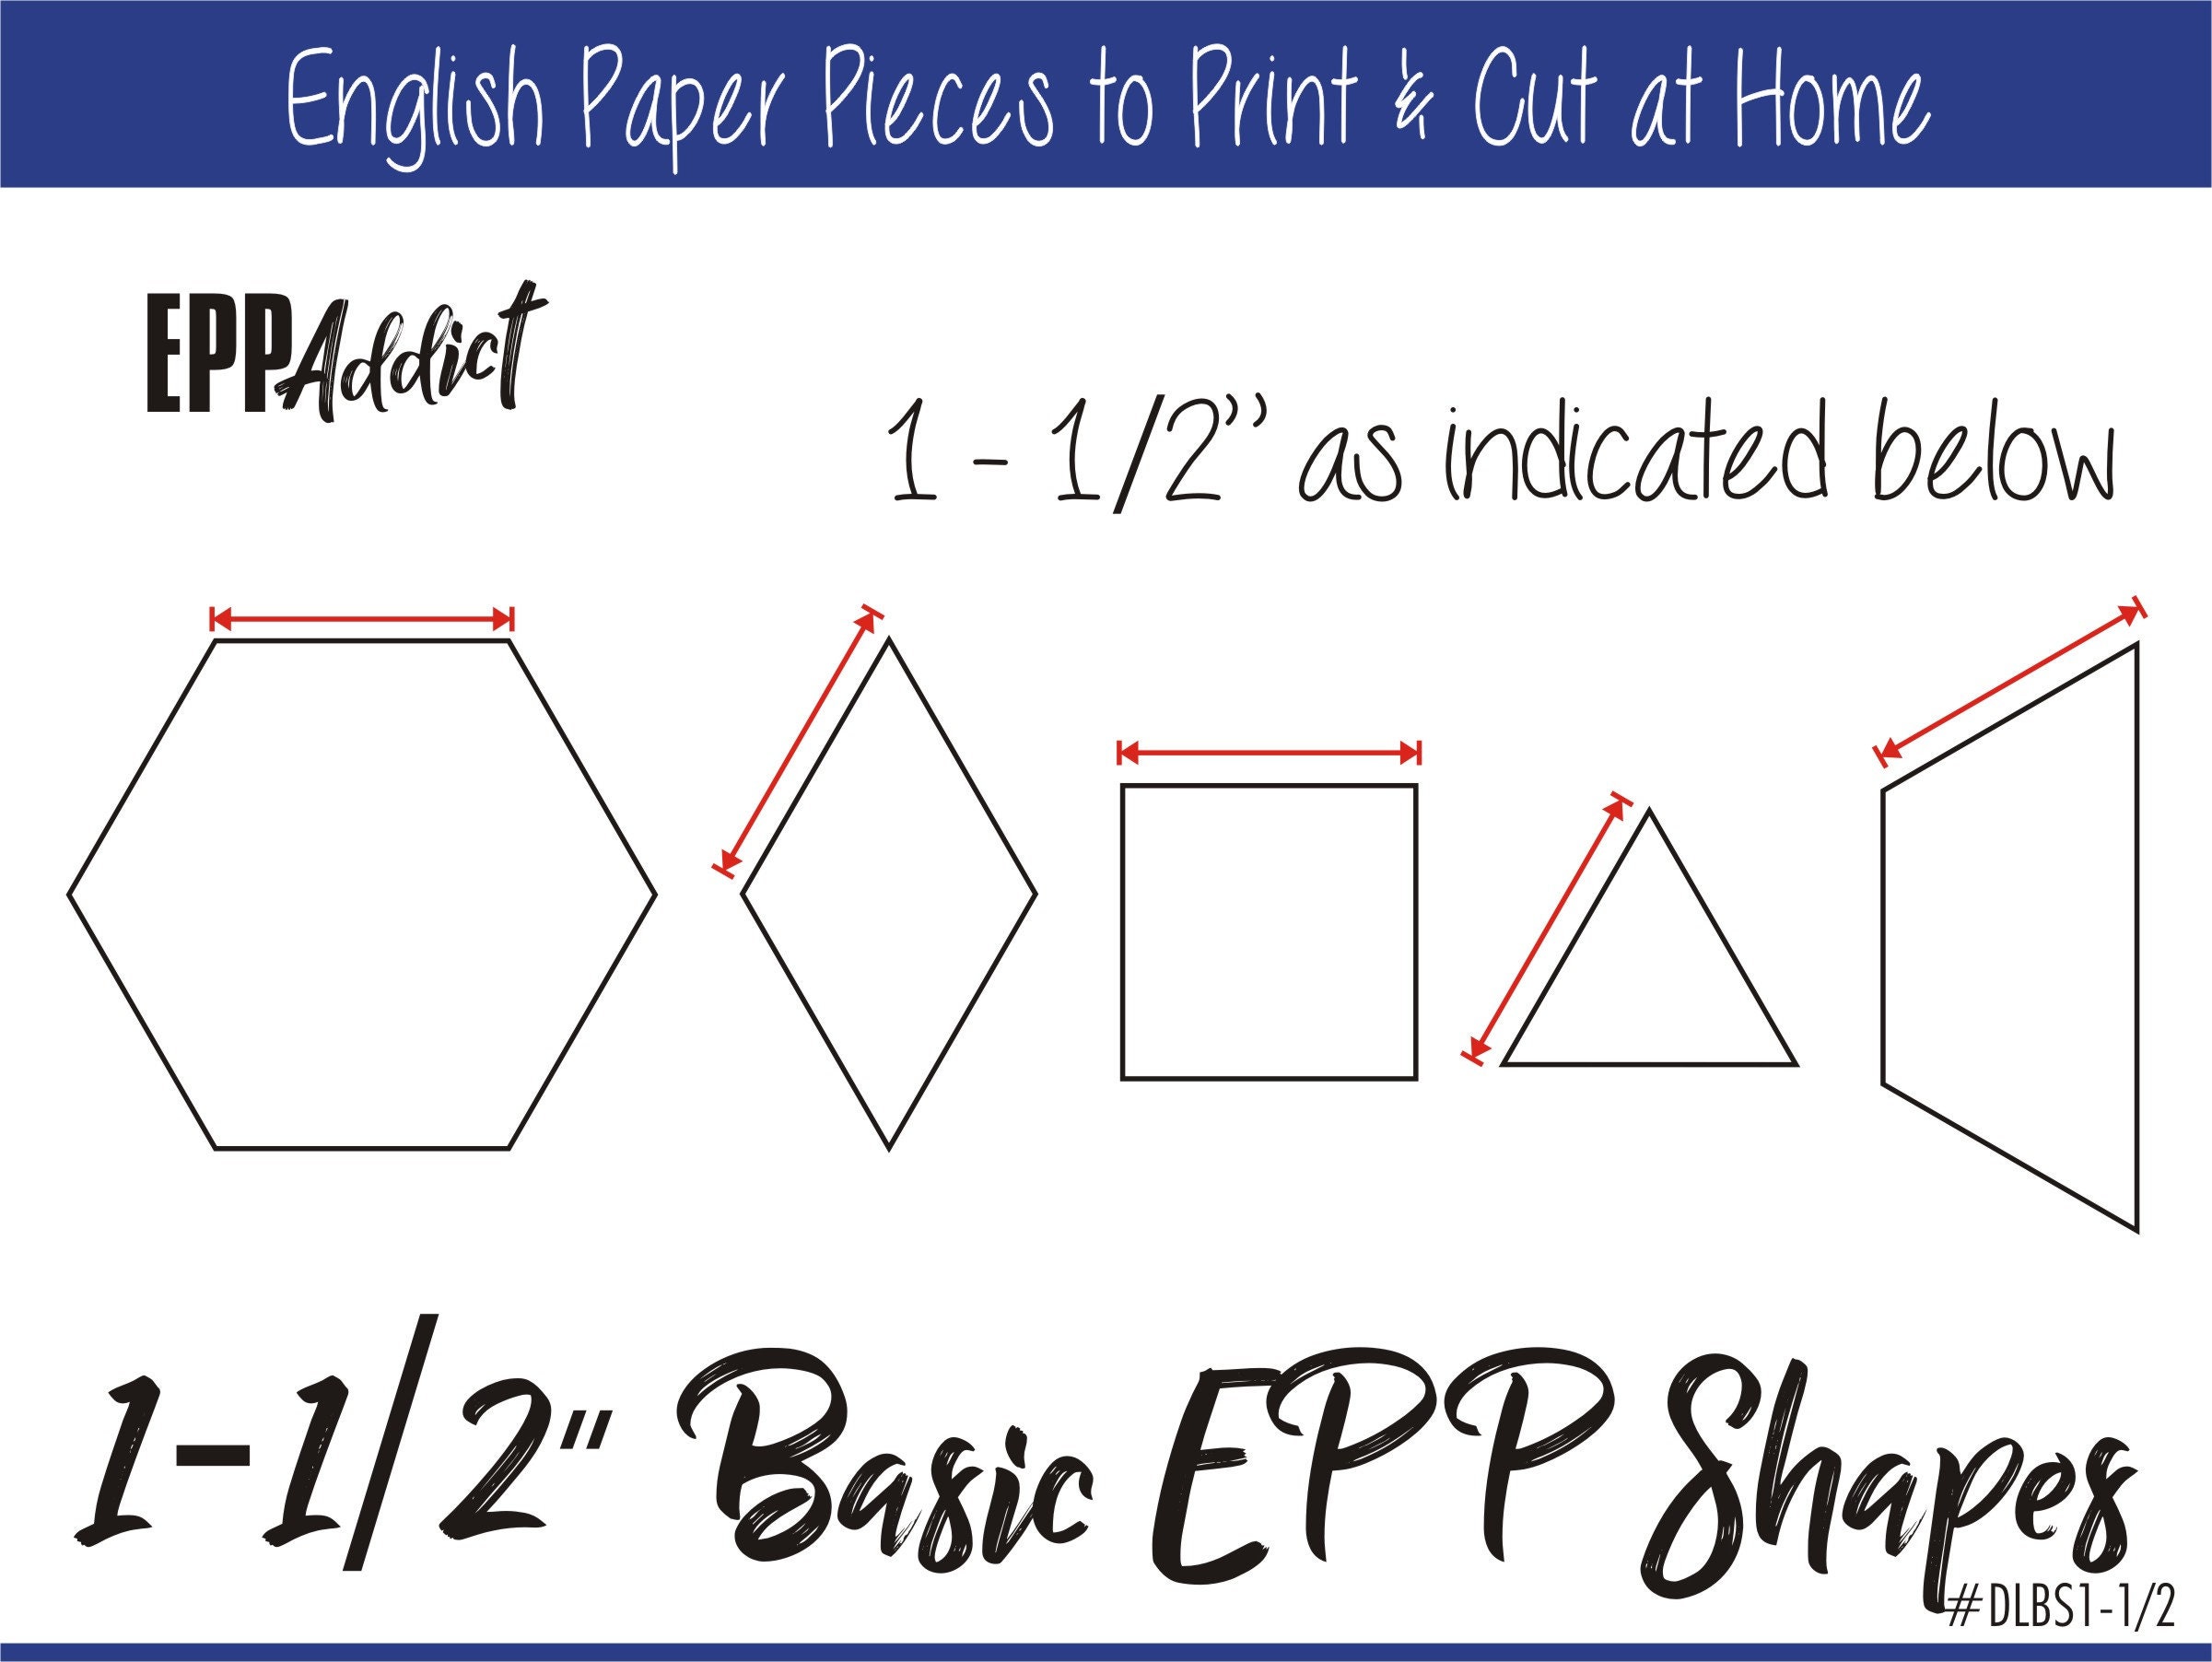 1.5 Print at Home Basic Shapes for English Paper Piecing EPP